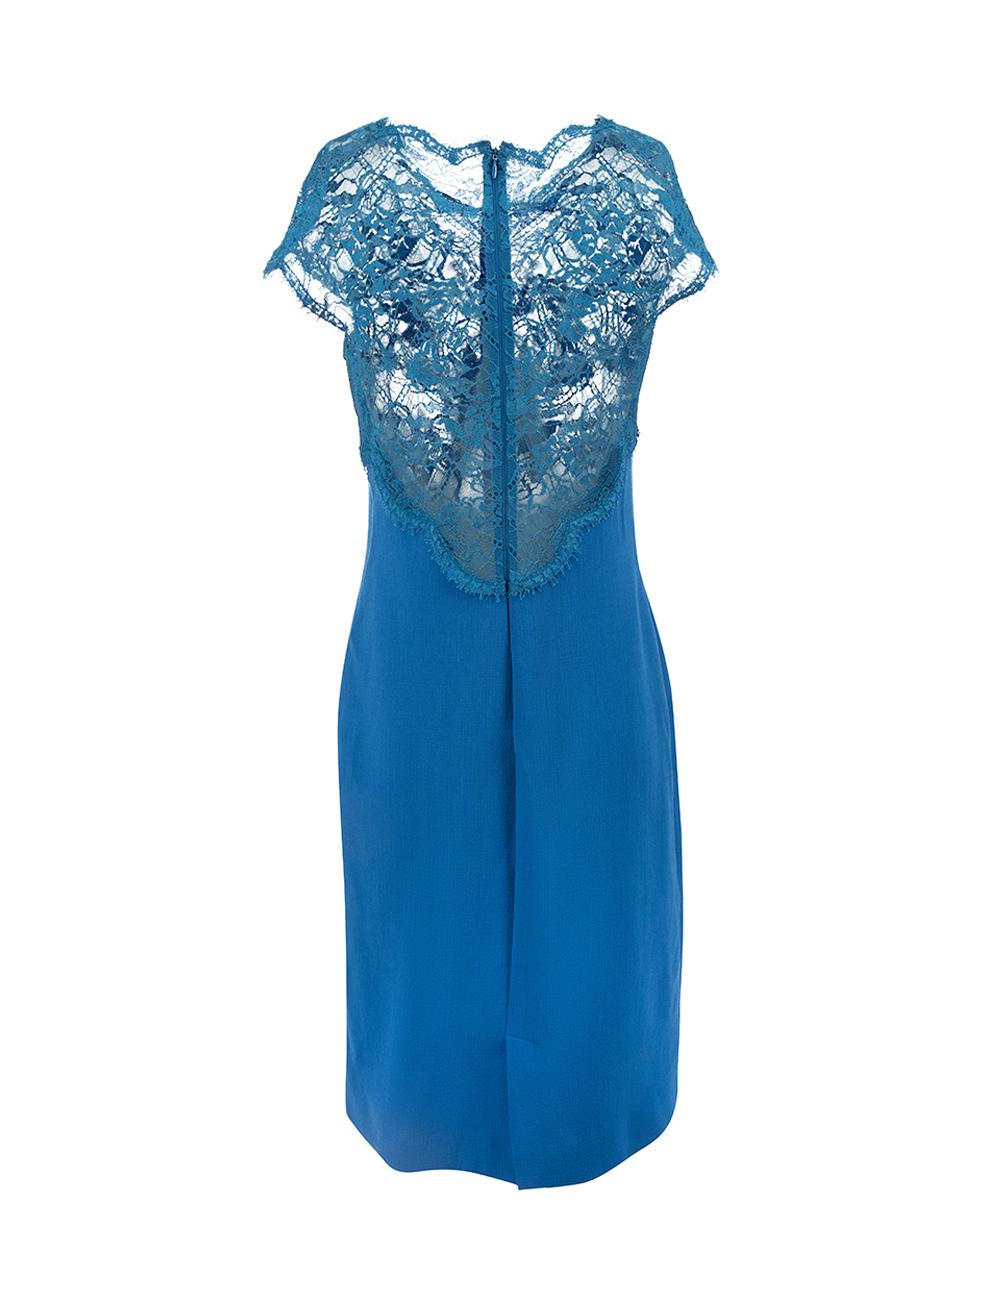 Emilio Pucci Blue Lace Panel Cap Sleeves Mini Dress Size L In Good Condition For Sale In London, GB